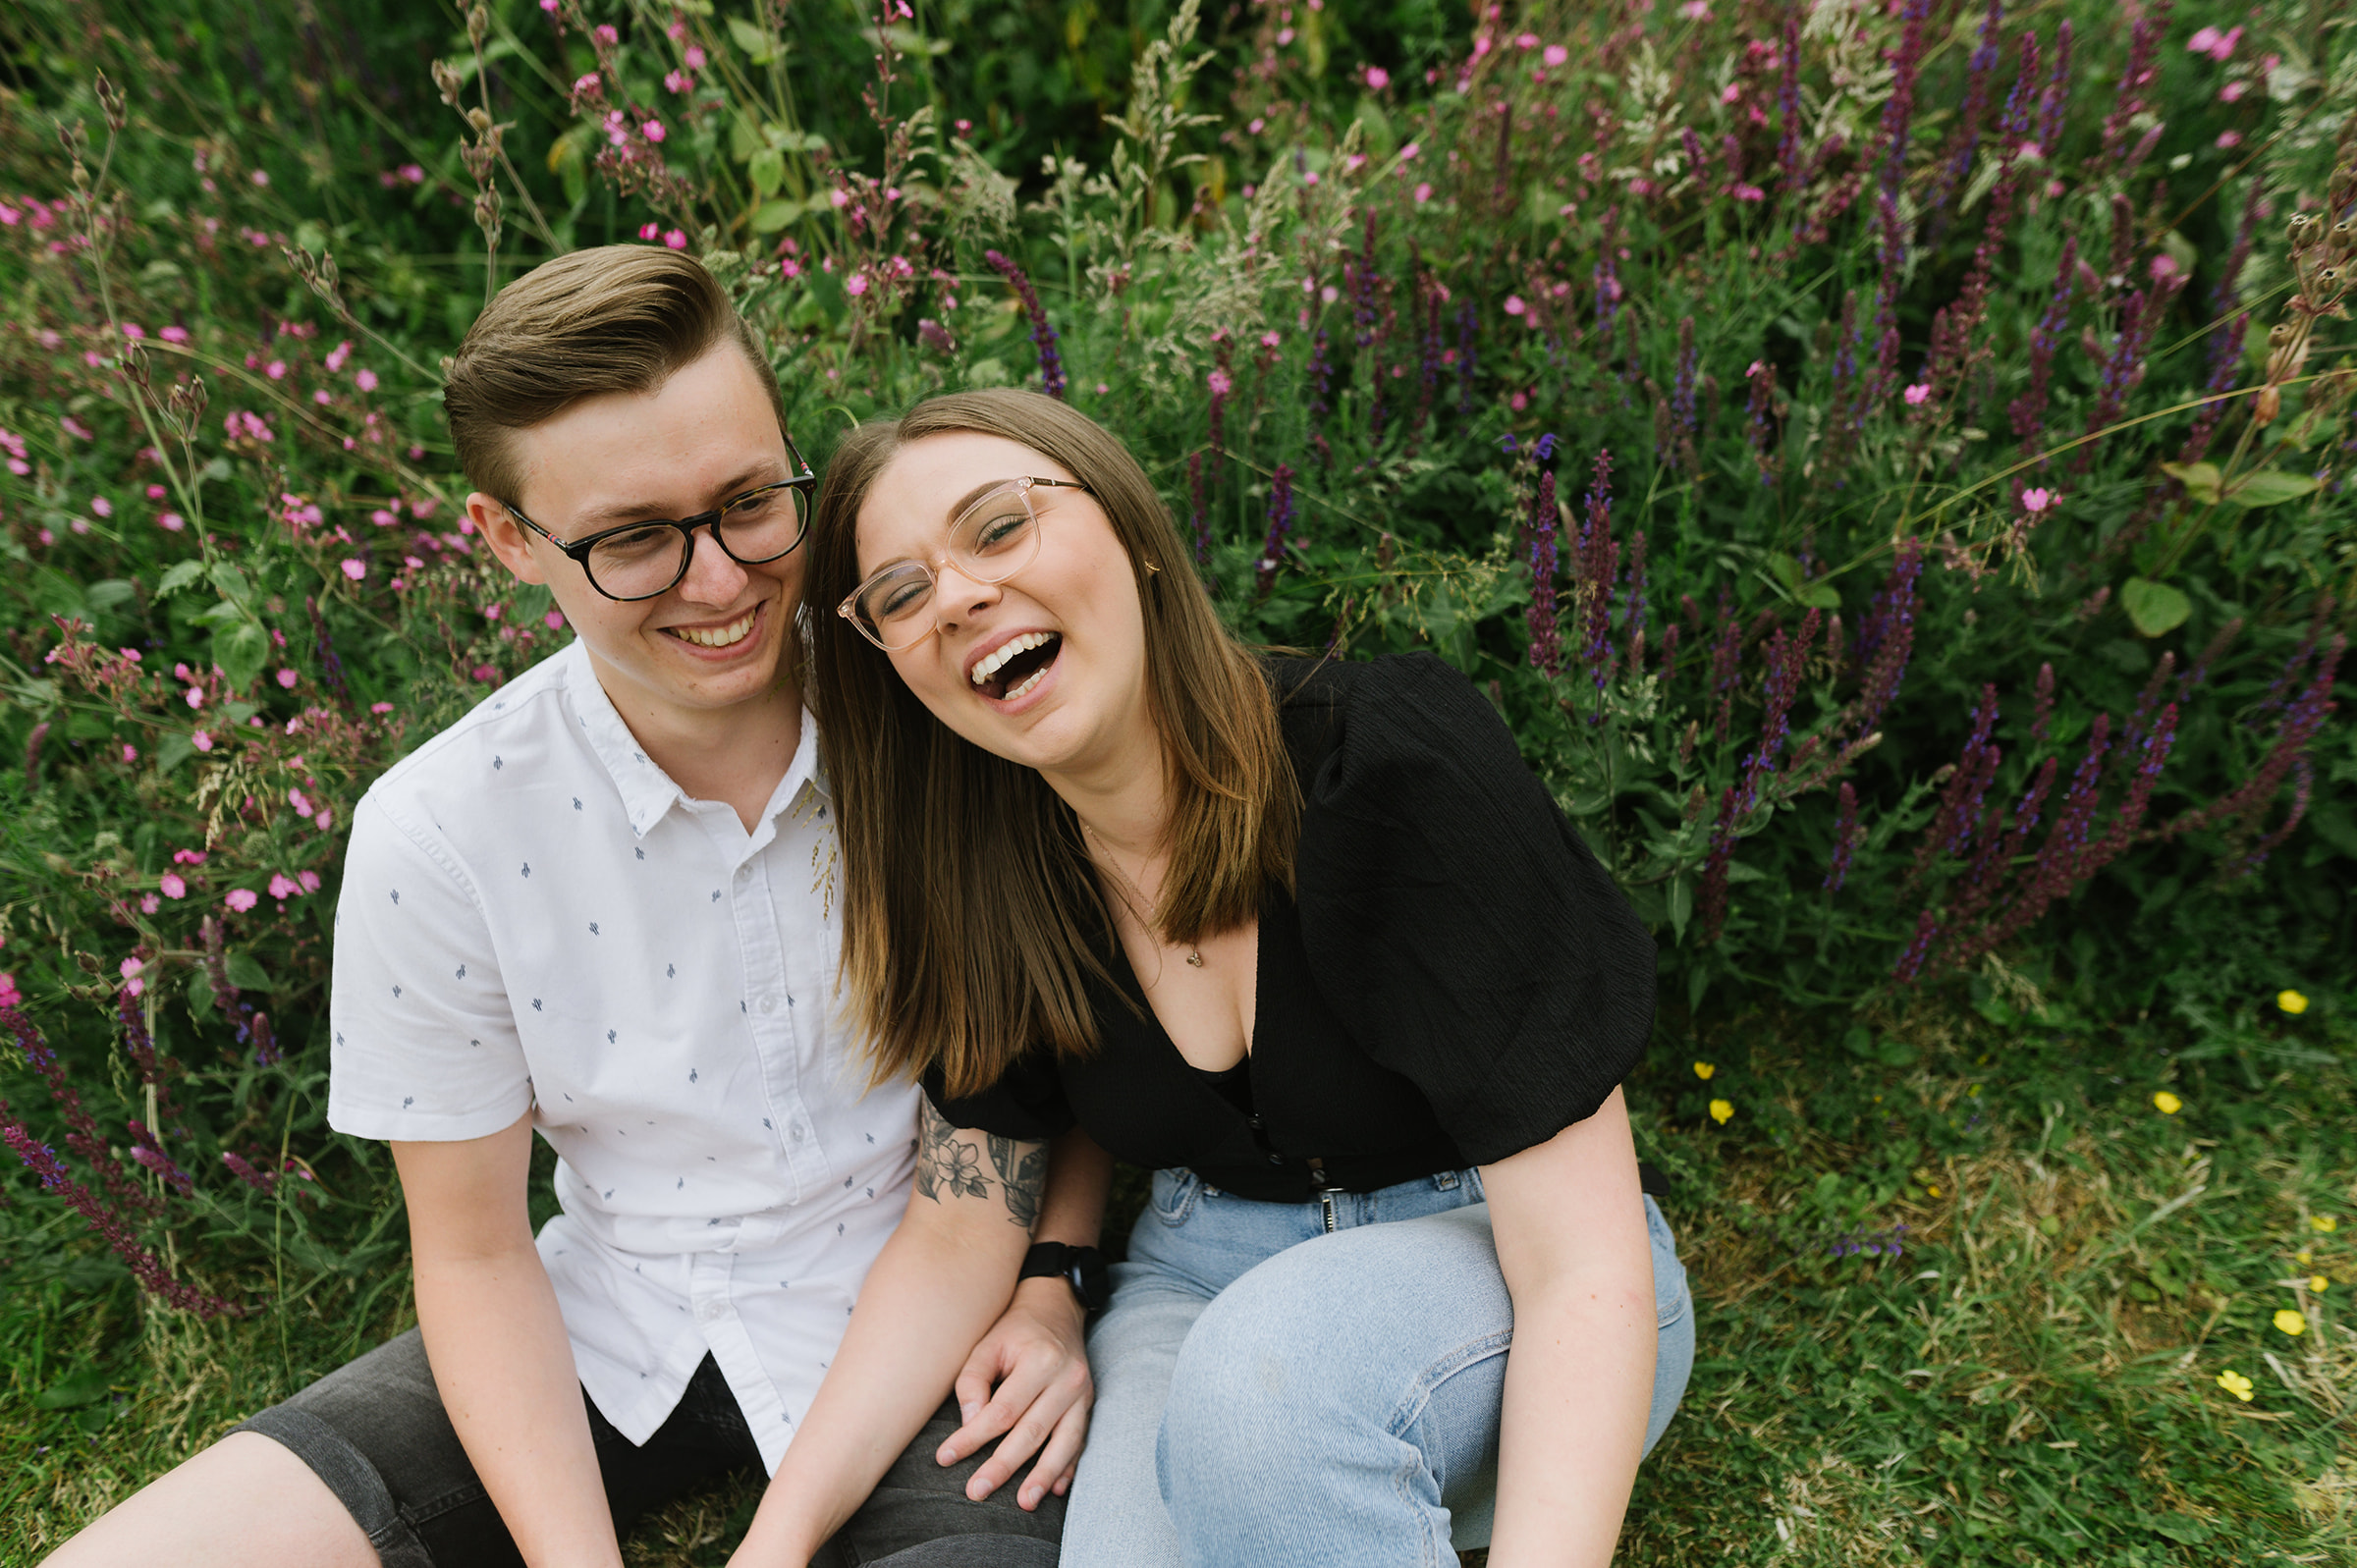 Sheffield's iconic Park Hill made the perfect backdrop for this engagement photo session